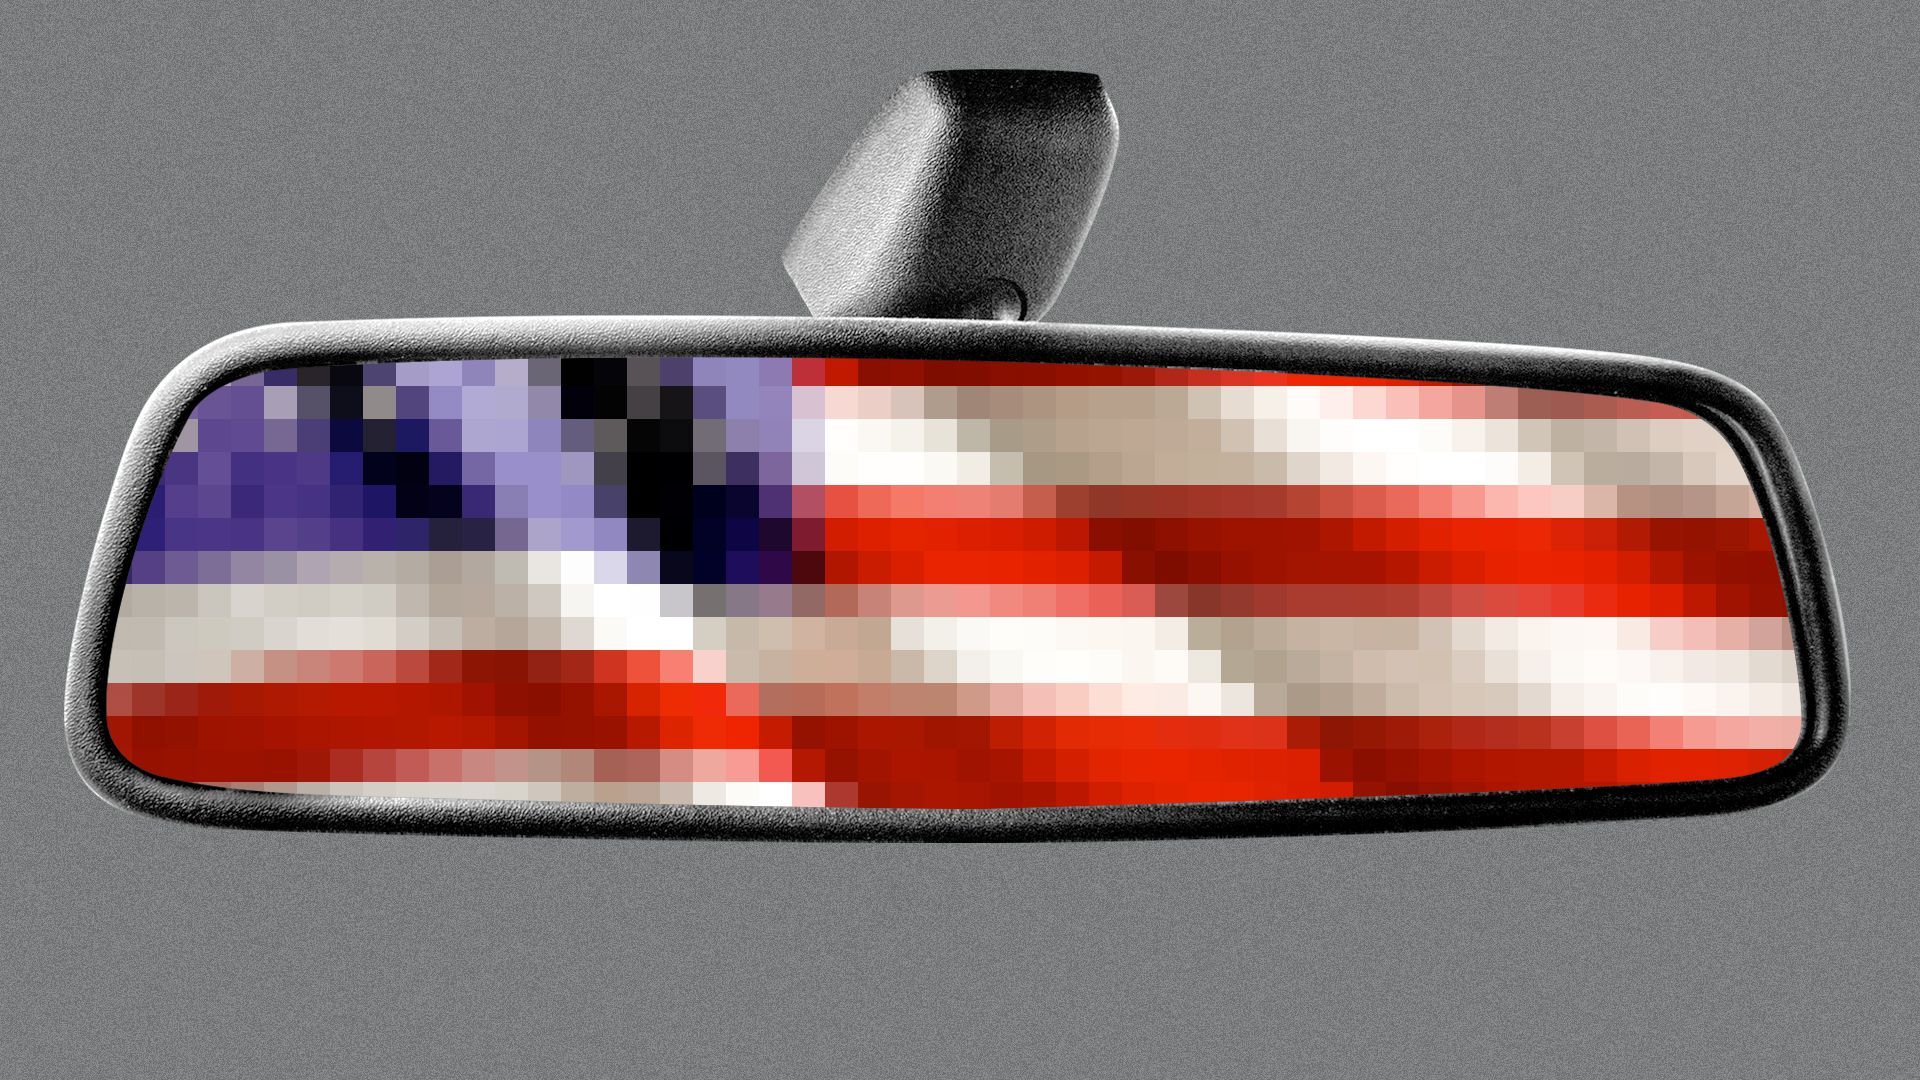 Illustration of a rearview mirror with a pixelated American flag reflected in it.